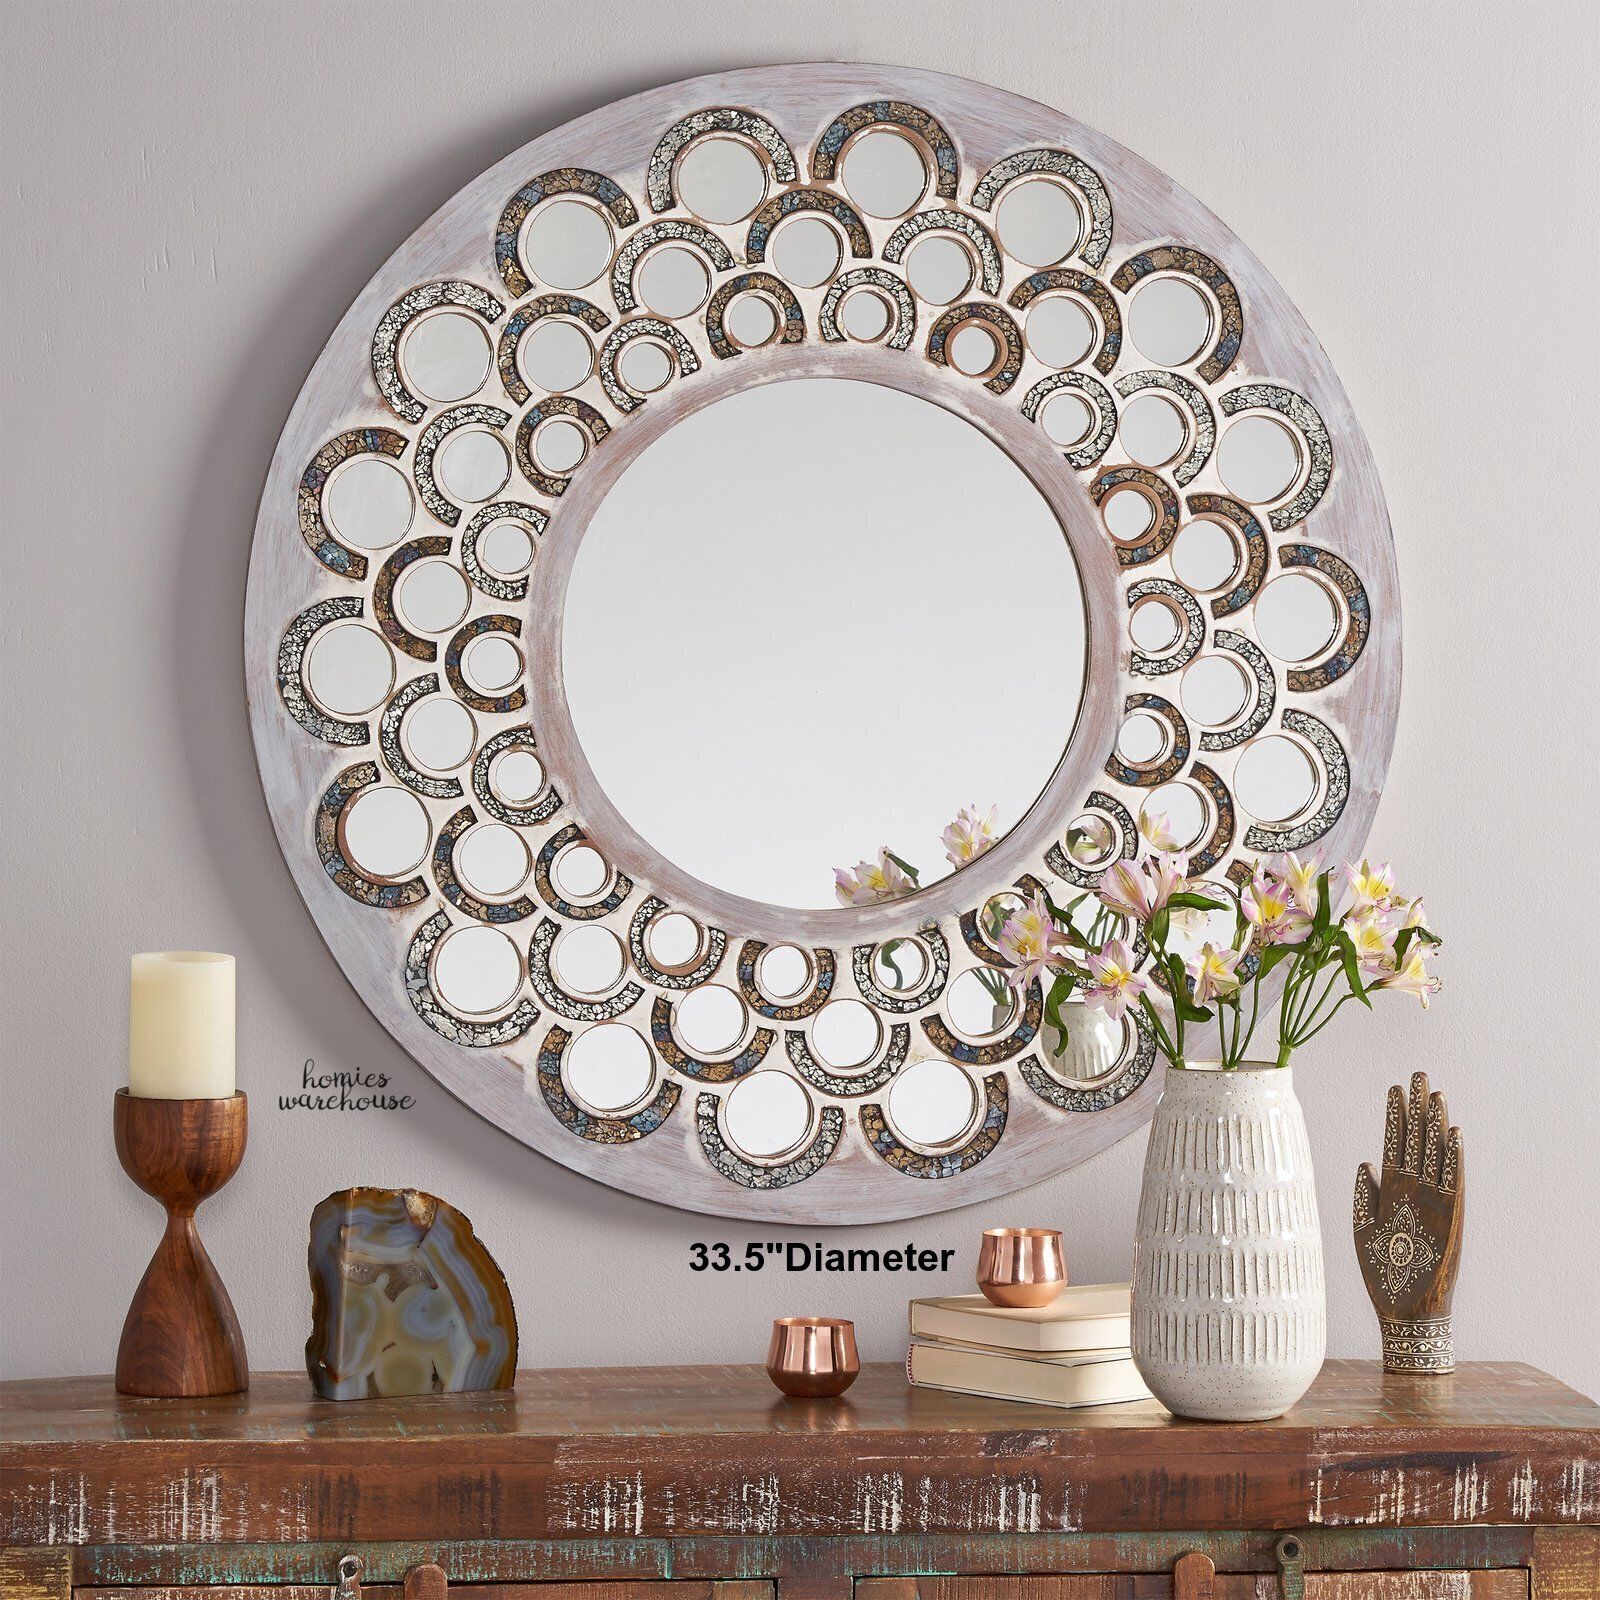 Large Round Wall Mirror Distressed Wood Frame w/Stained Glass Circles Glam Decor - Home Decor Gifts and More